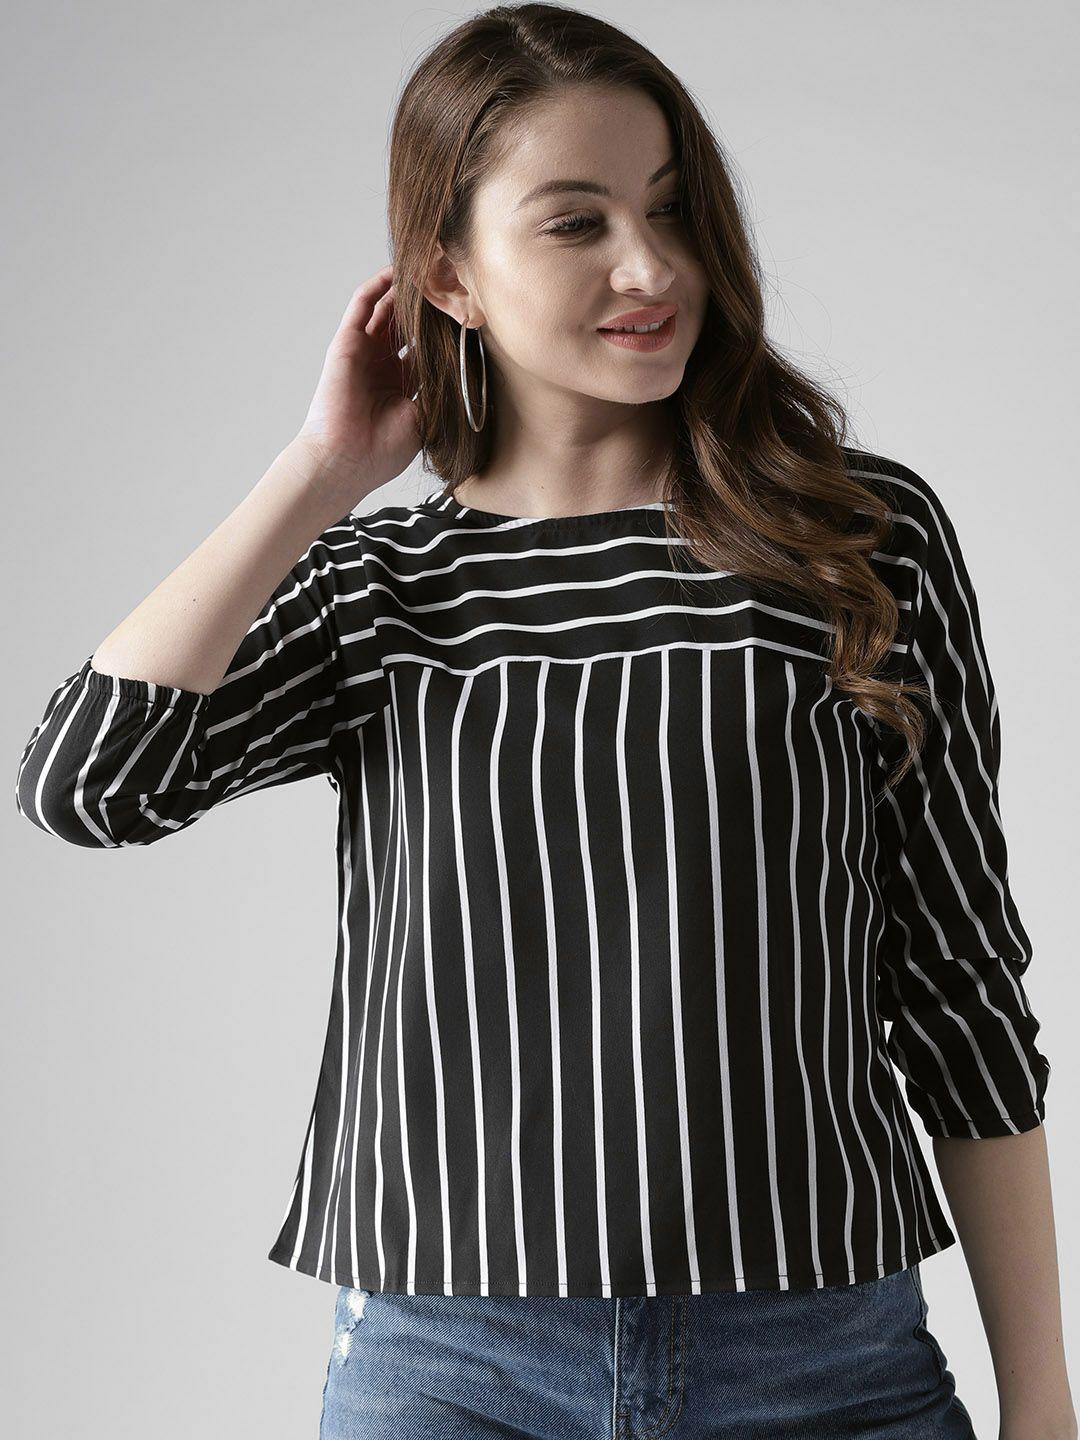 style quotient by noi women black & white striped boxy top